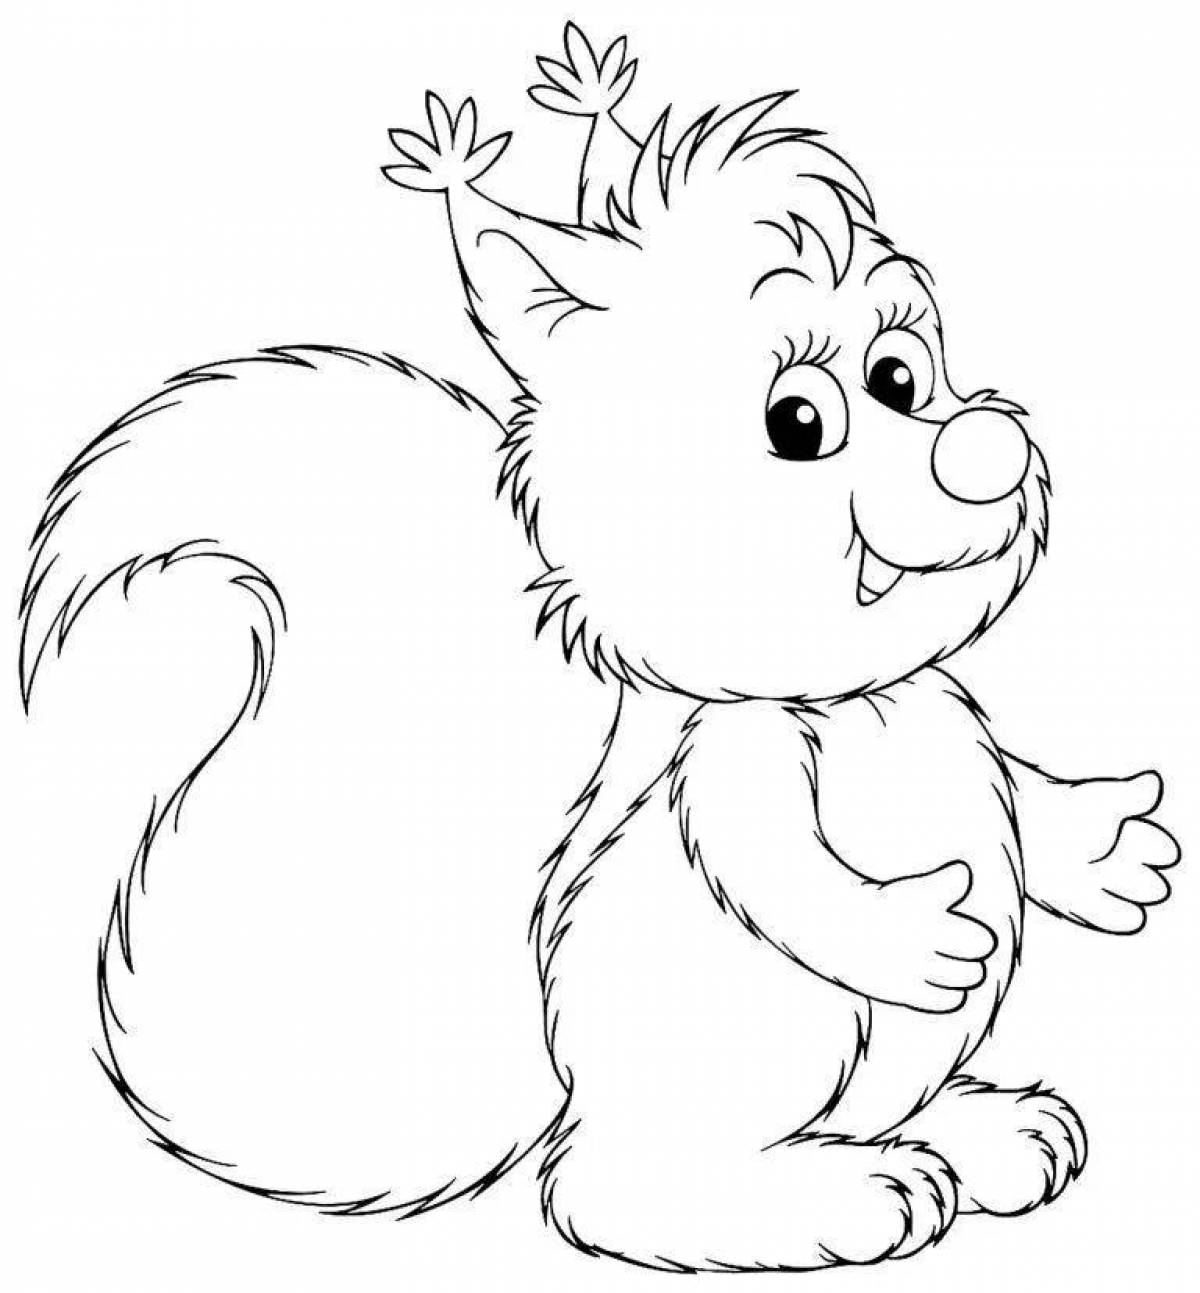 Coloring page excited squirrel